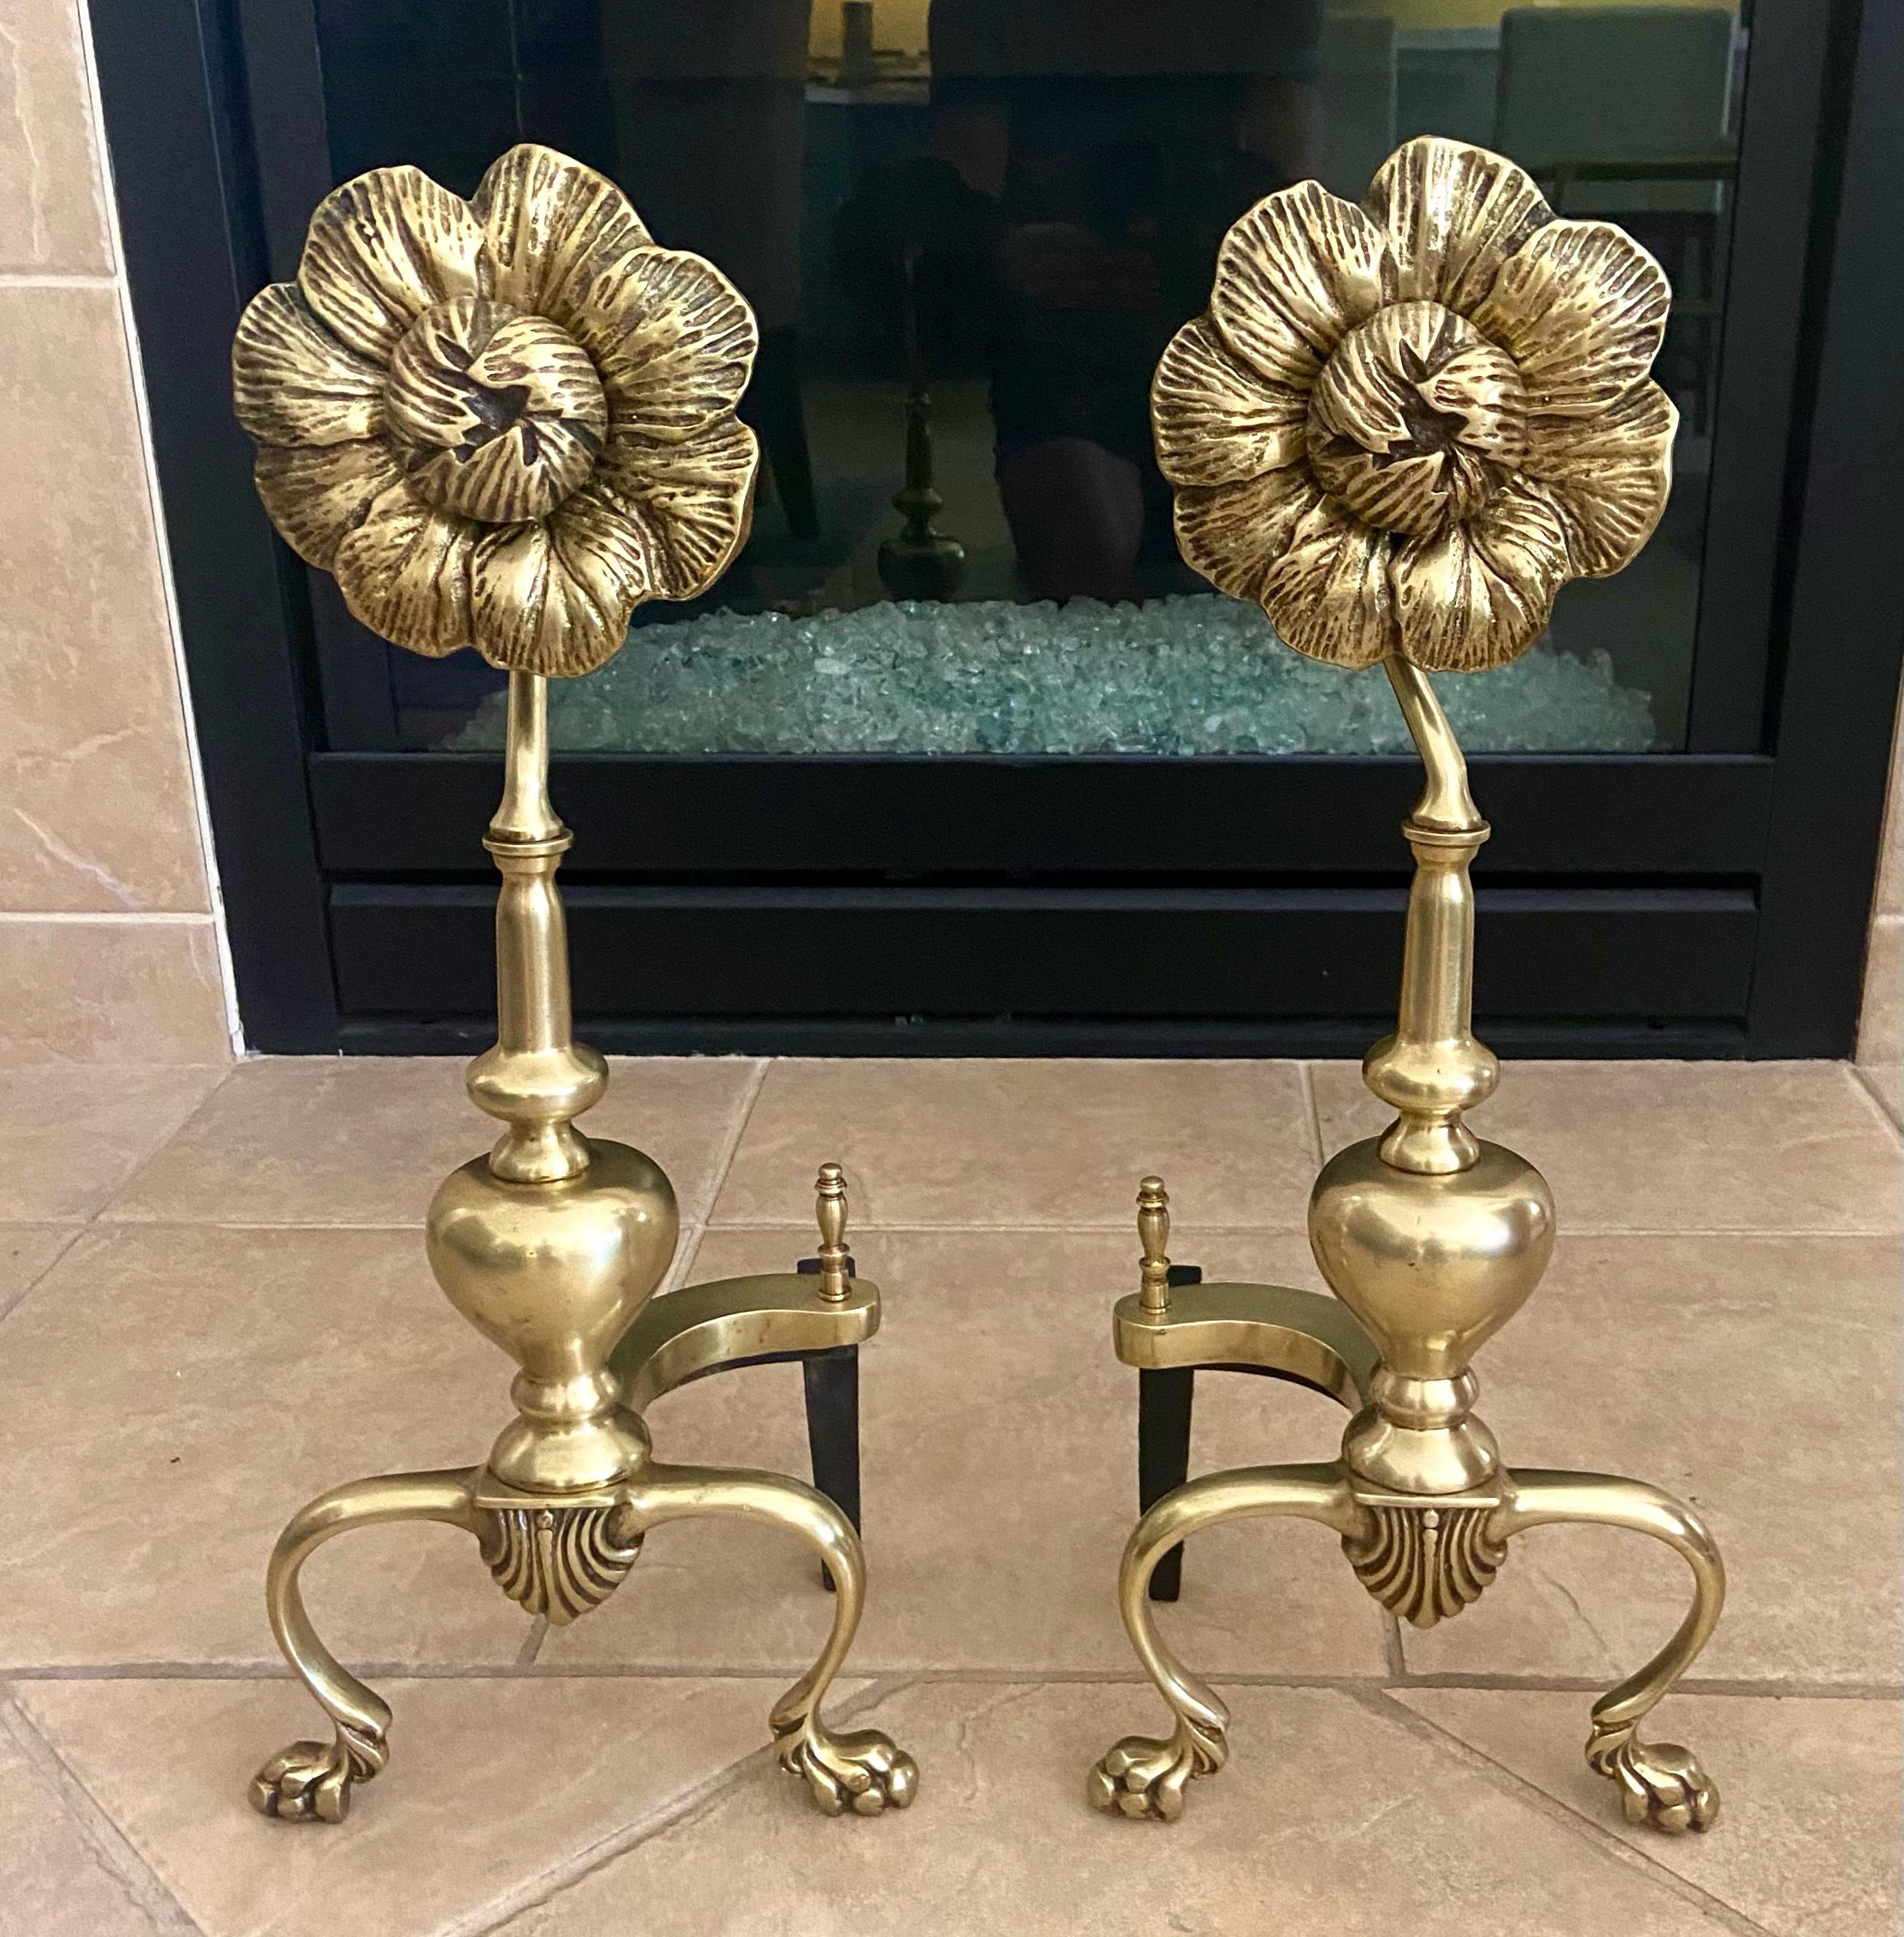 Pair of 1950s solid brass sunflower fireplace andirons. Stylized flower motif with nice detailing including paw feet. Recently cleaned and polished.